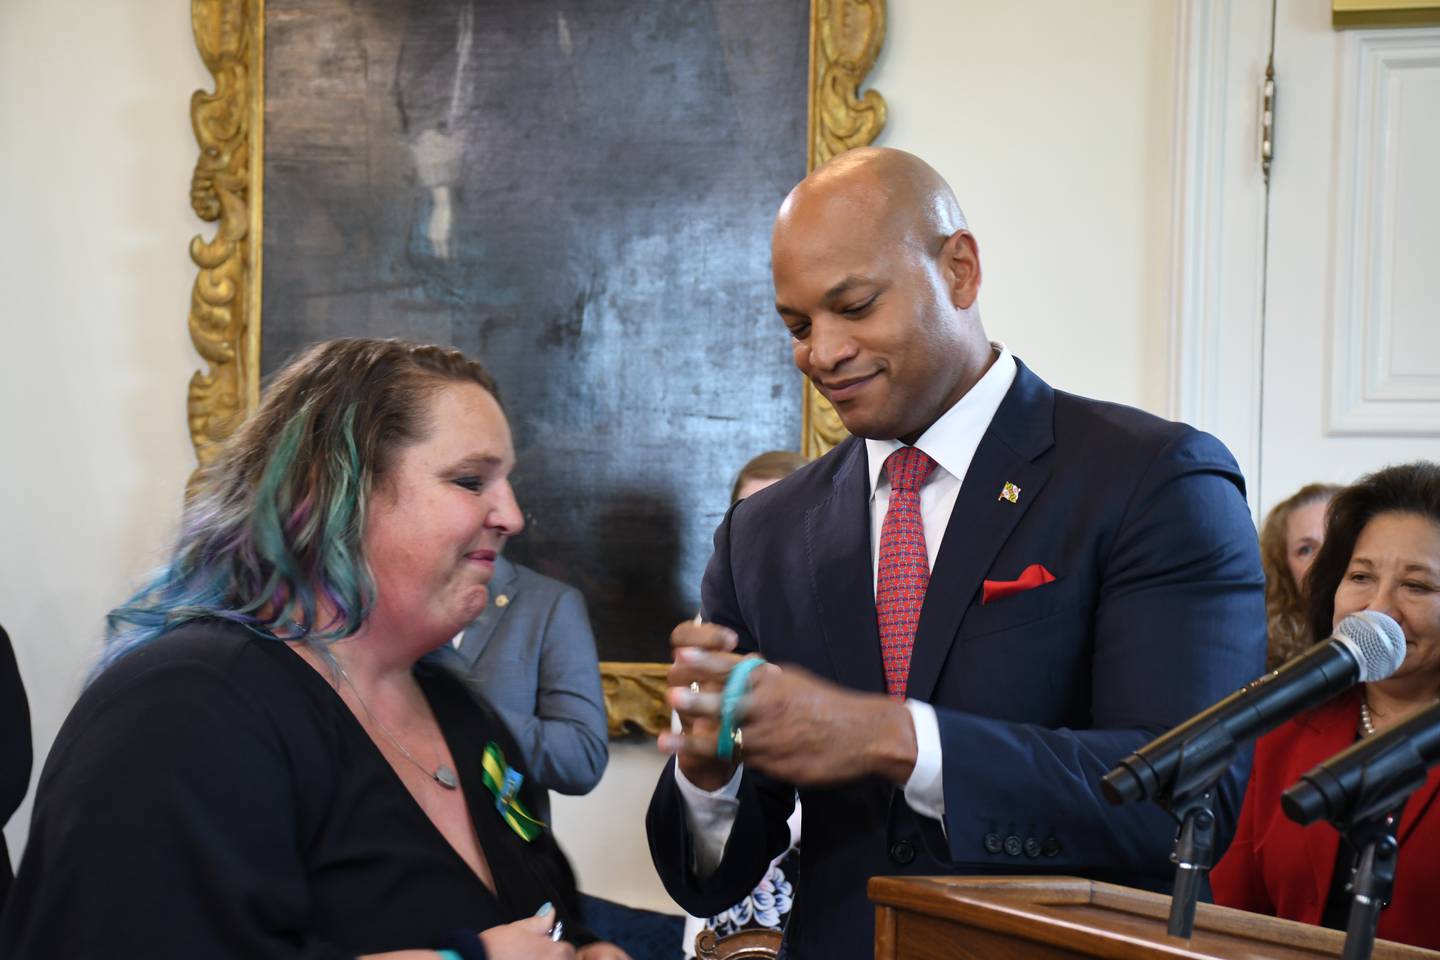 Melissa Willey, the mother of the late Jaelynn Willey, gives a commemorative bracelet to Gov. Wes Moore at a bill signing ceremony at the State House in Annapolis on Tuesday, May 16, 2023. Jaelynn was fatally shot at school by a classmate in 2018, and a new law named for her tightens the law for keeping guns away from minors.